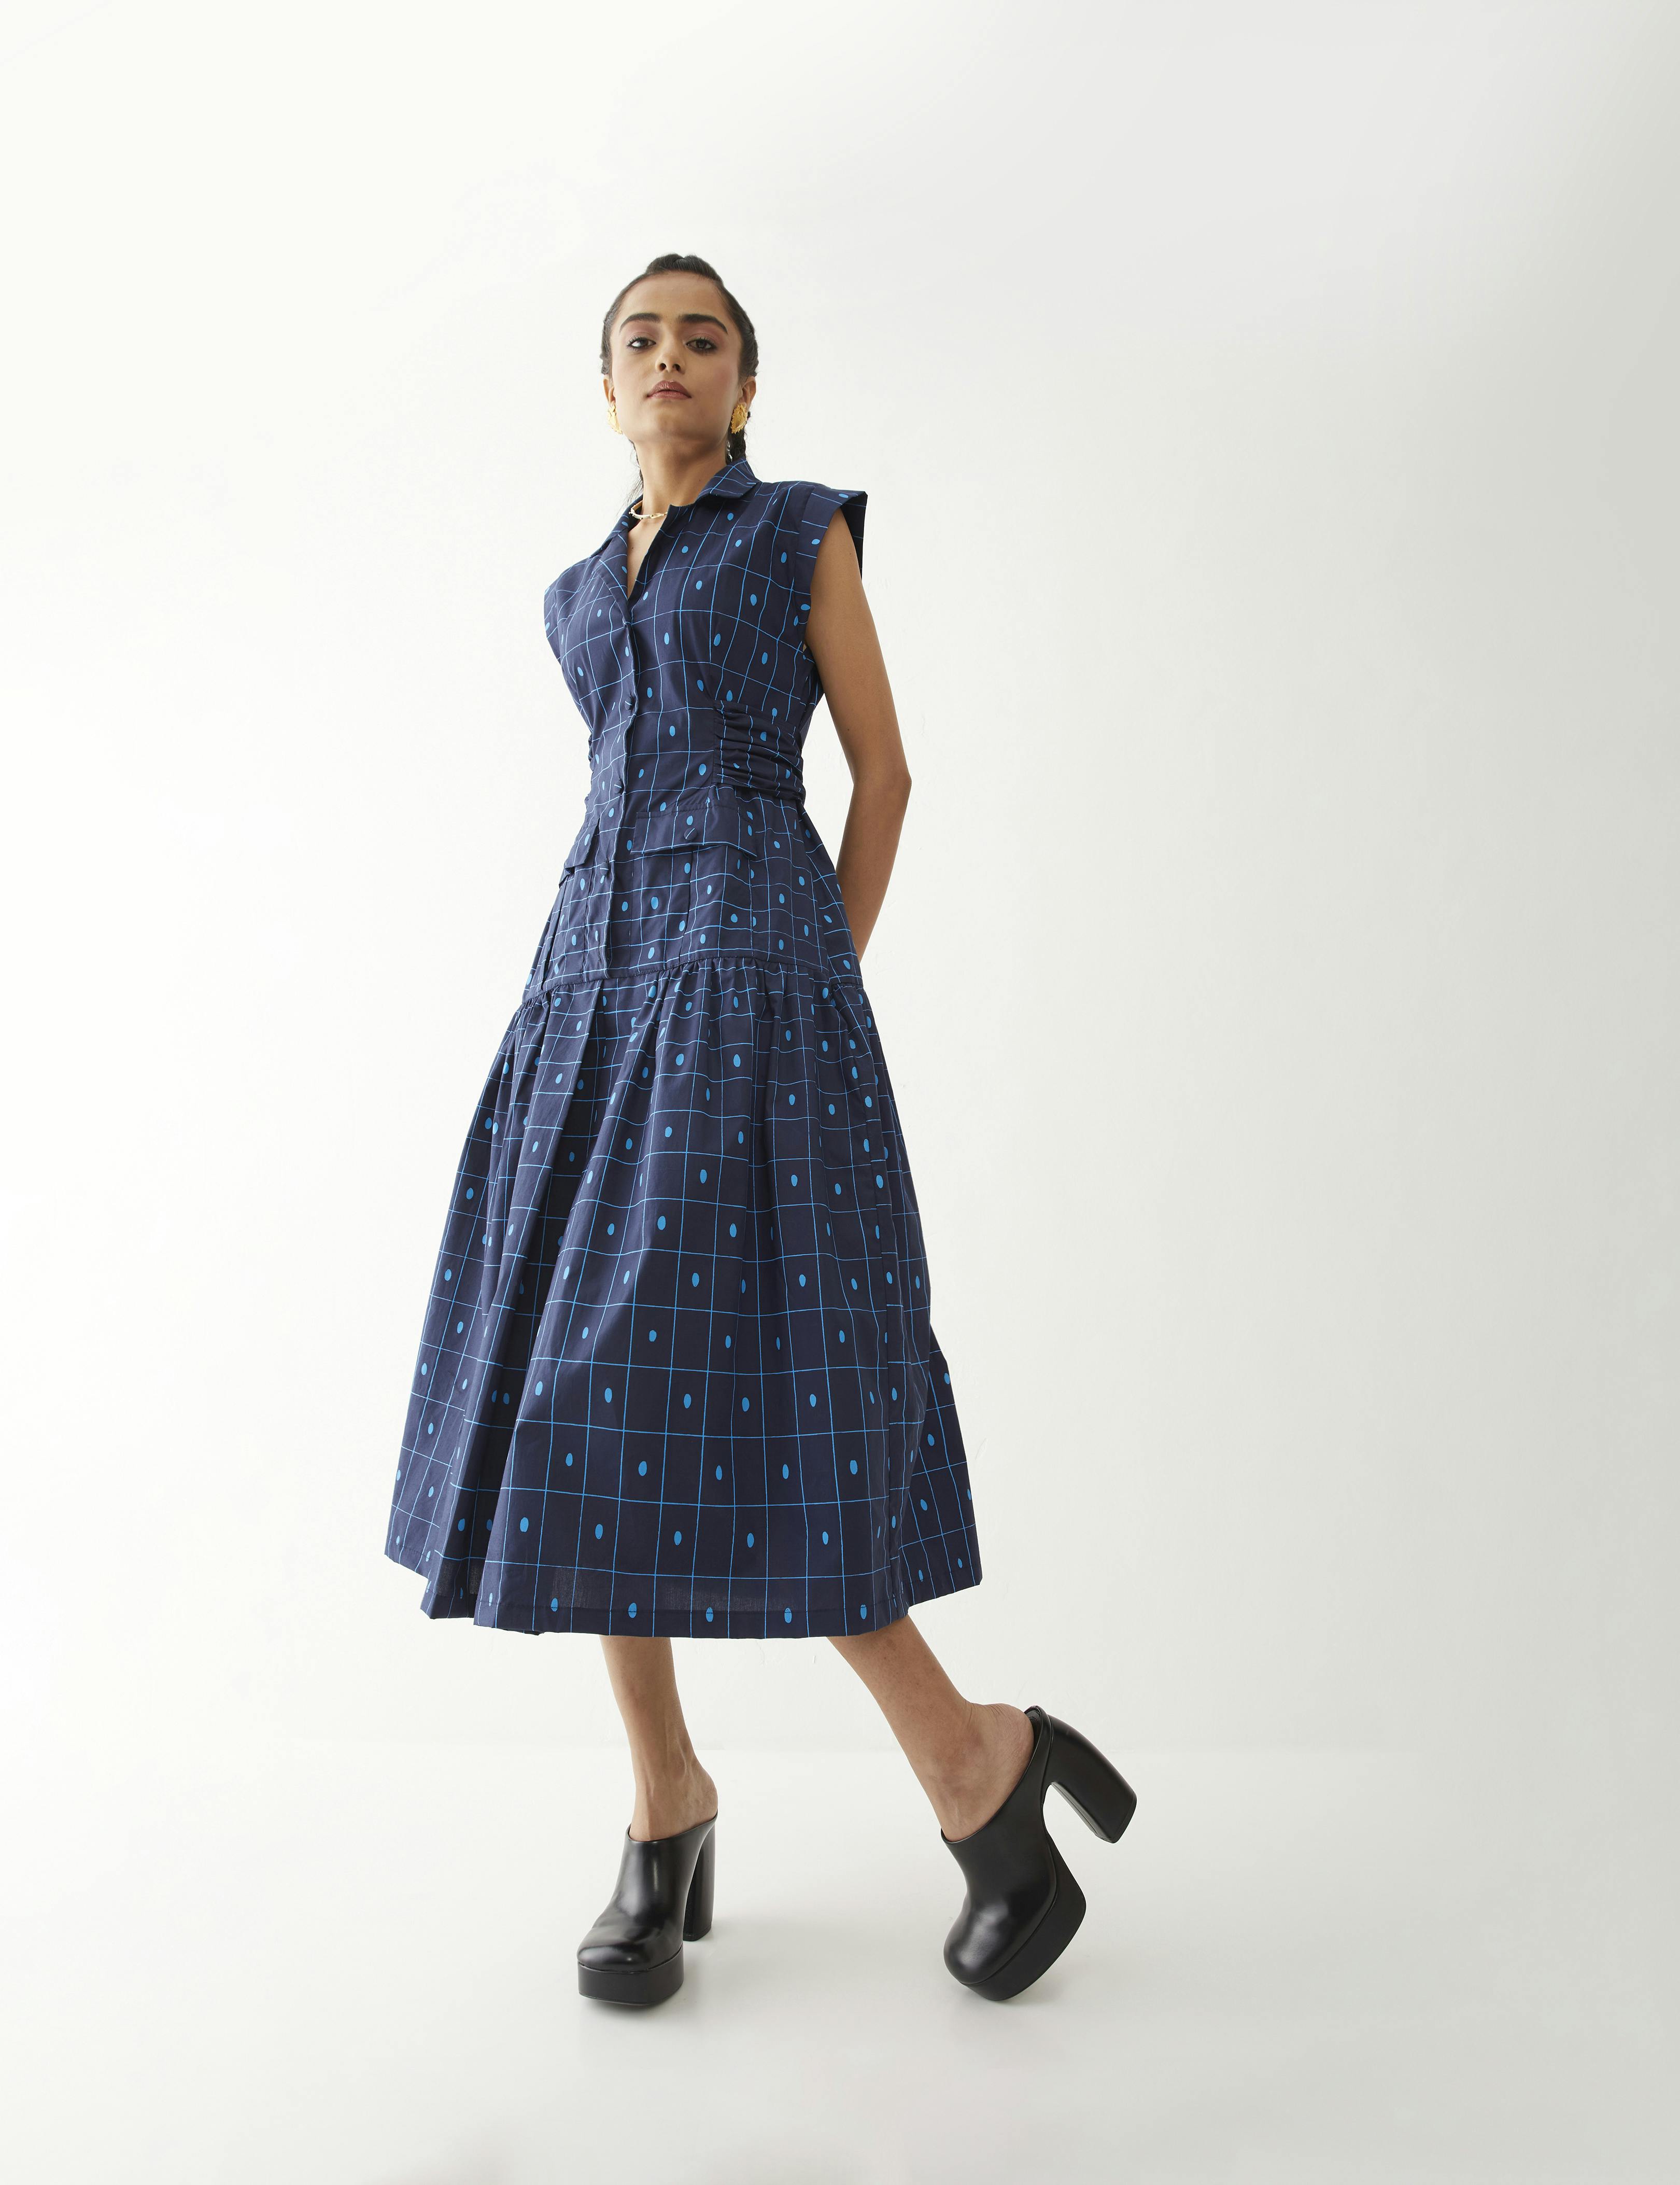 Agnes Dress, a product by Son of a Noble